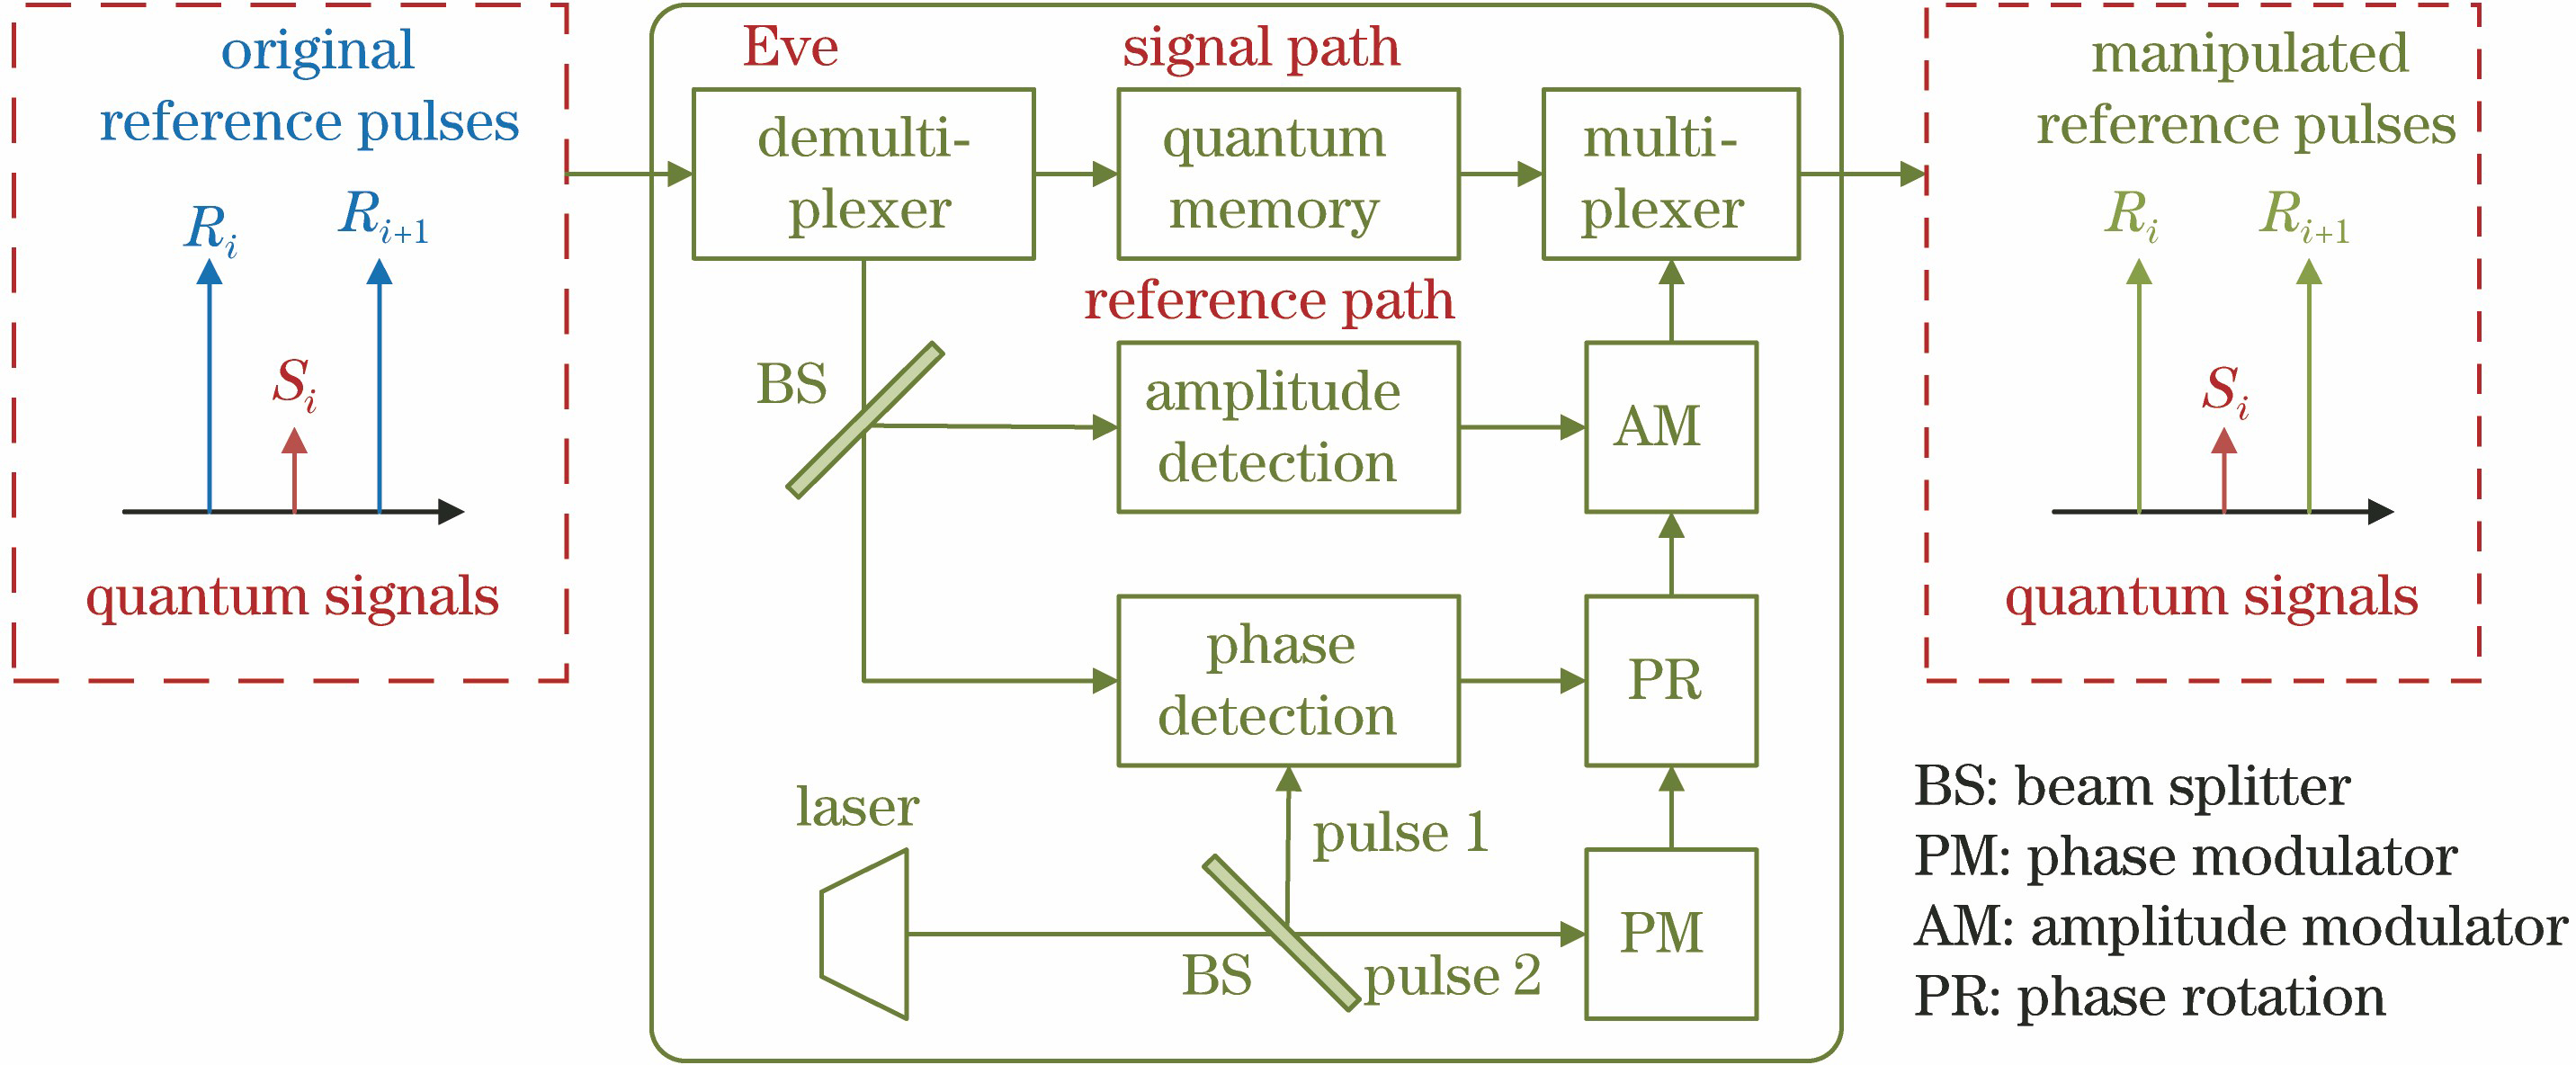 Diagram of phase attack on reference pulses